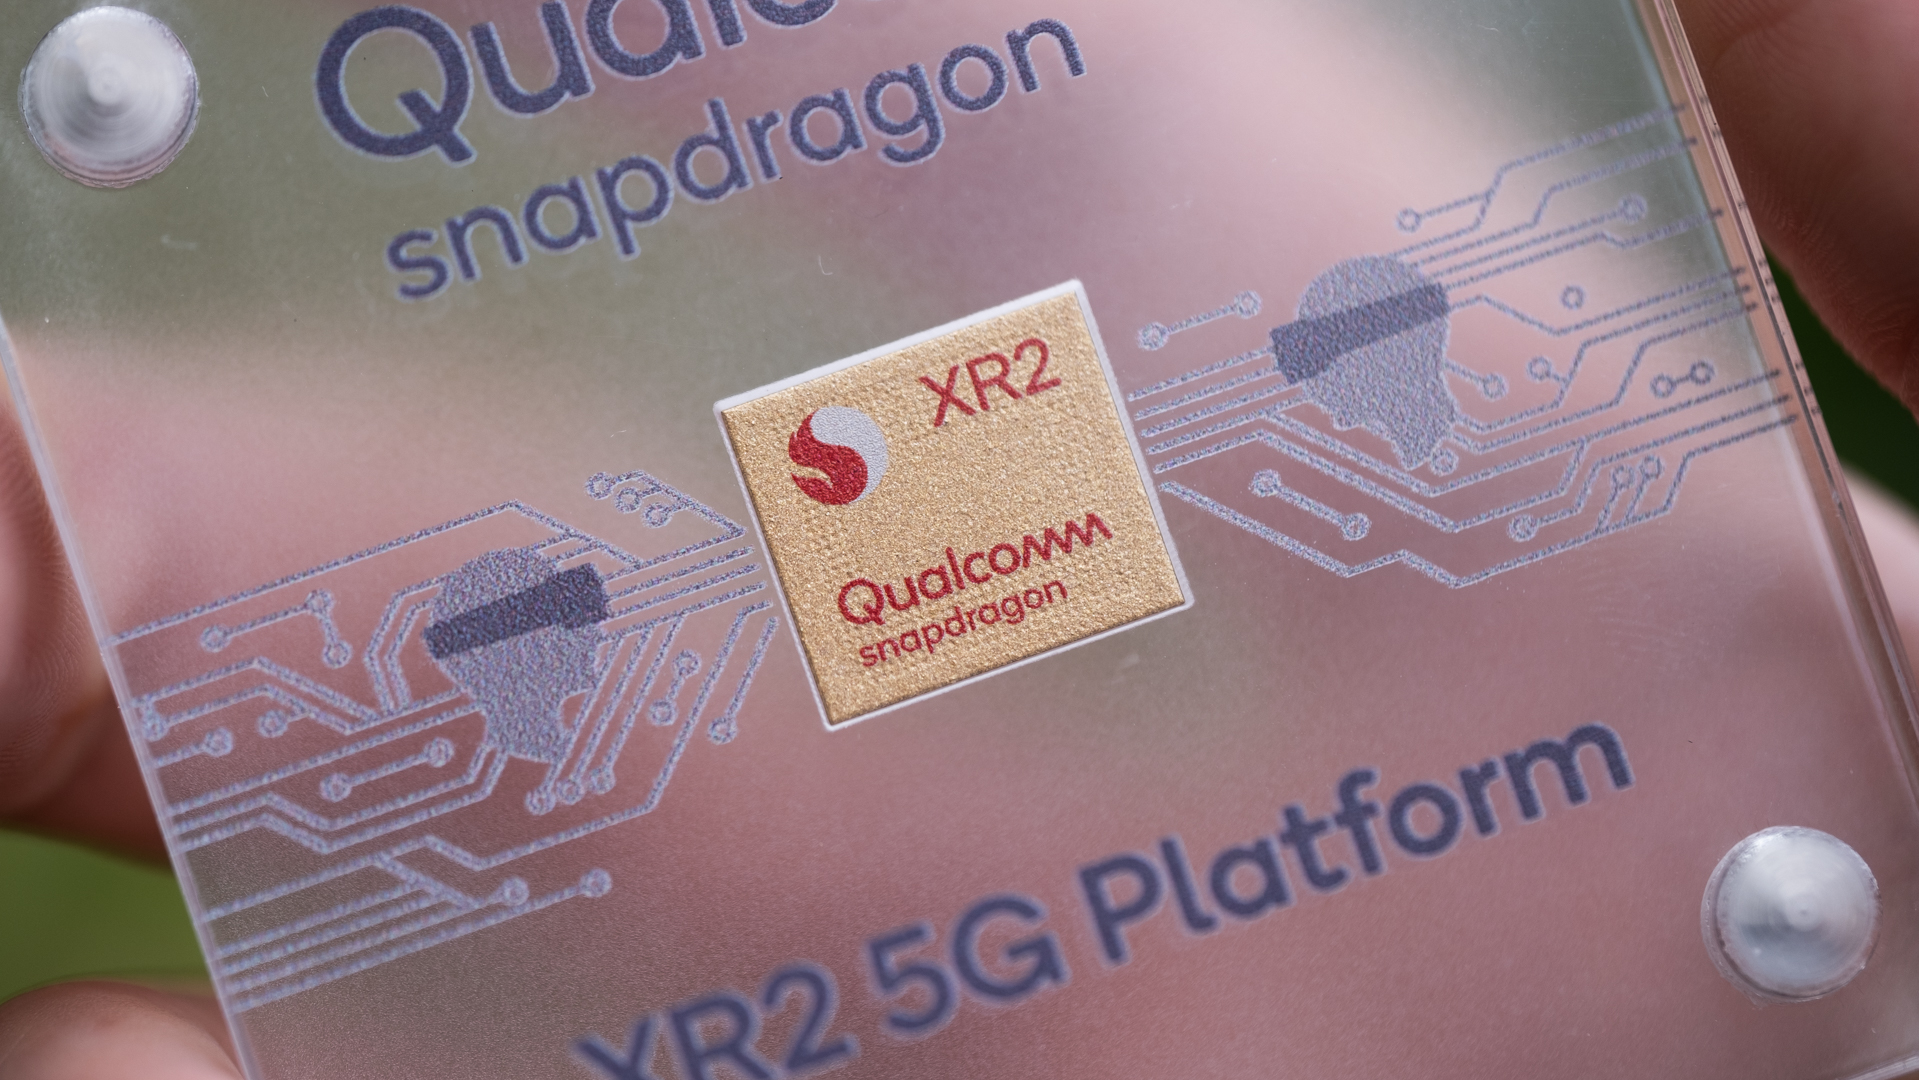 Qualcomm Snapdragon XR2 chip is close